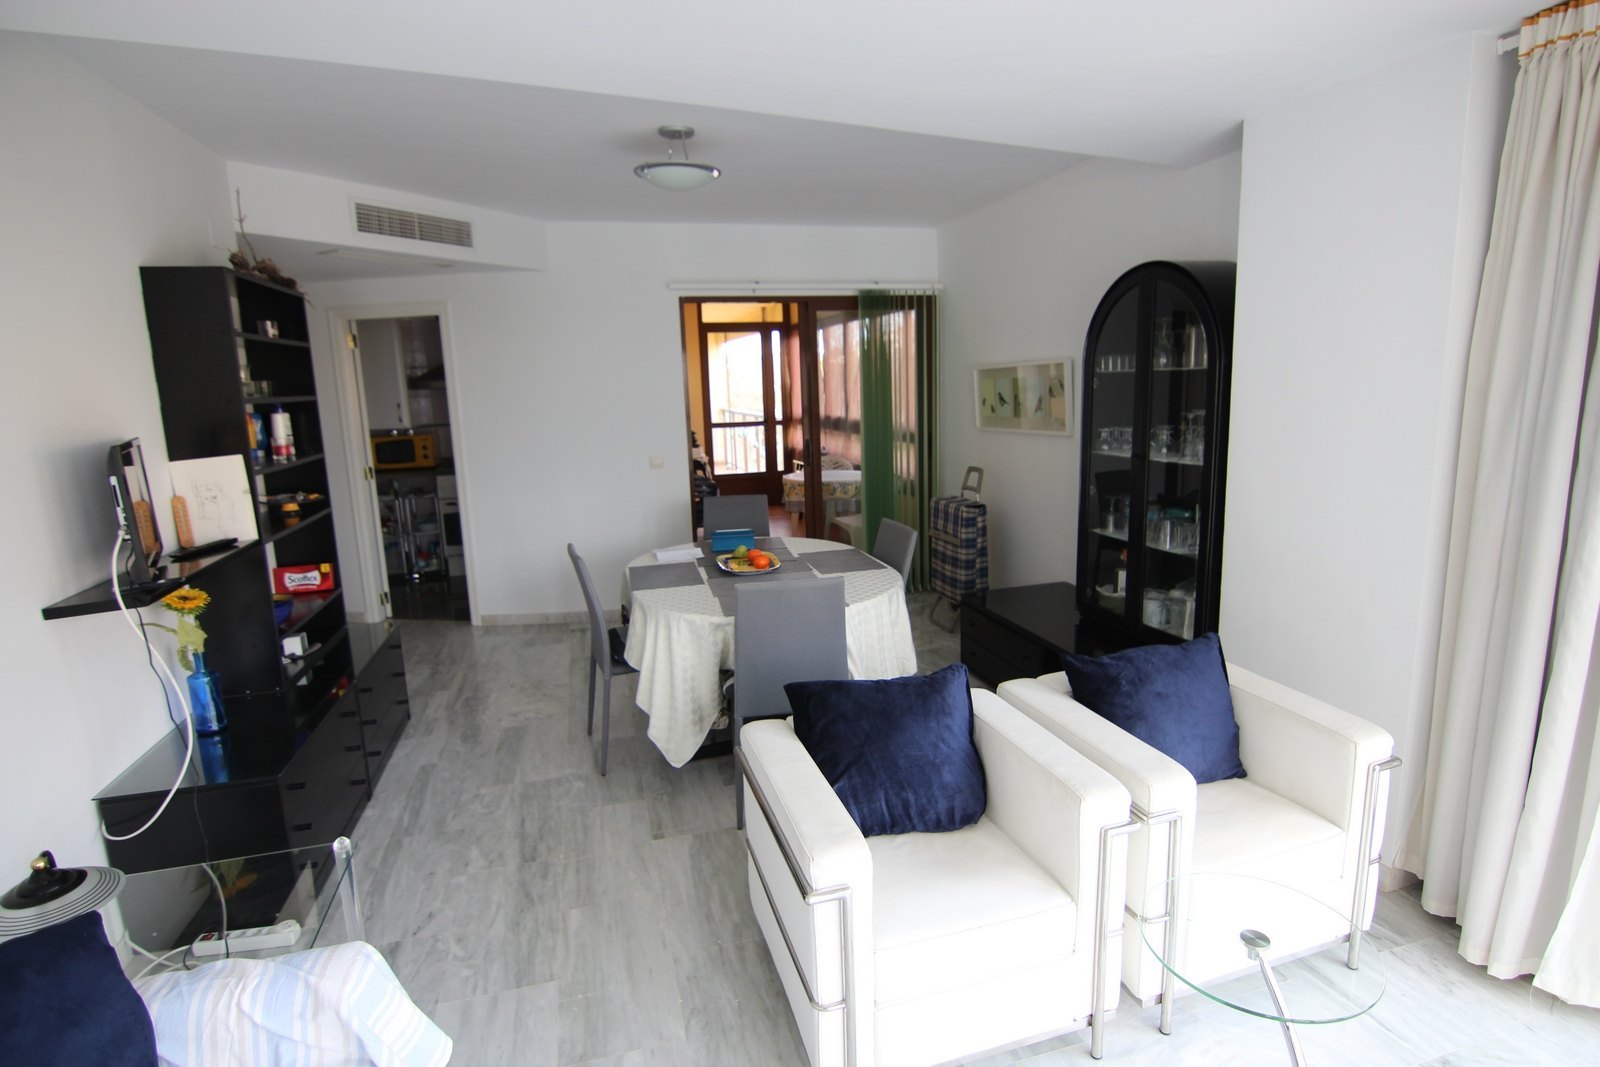 Apartment with a sea view for sale in Moraira.